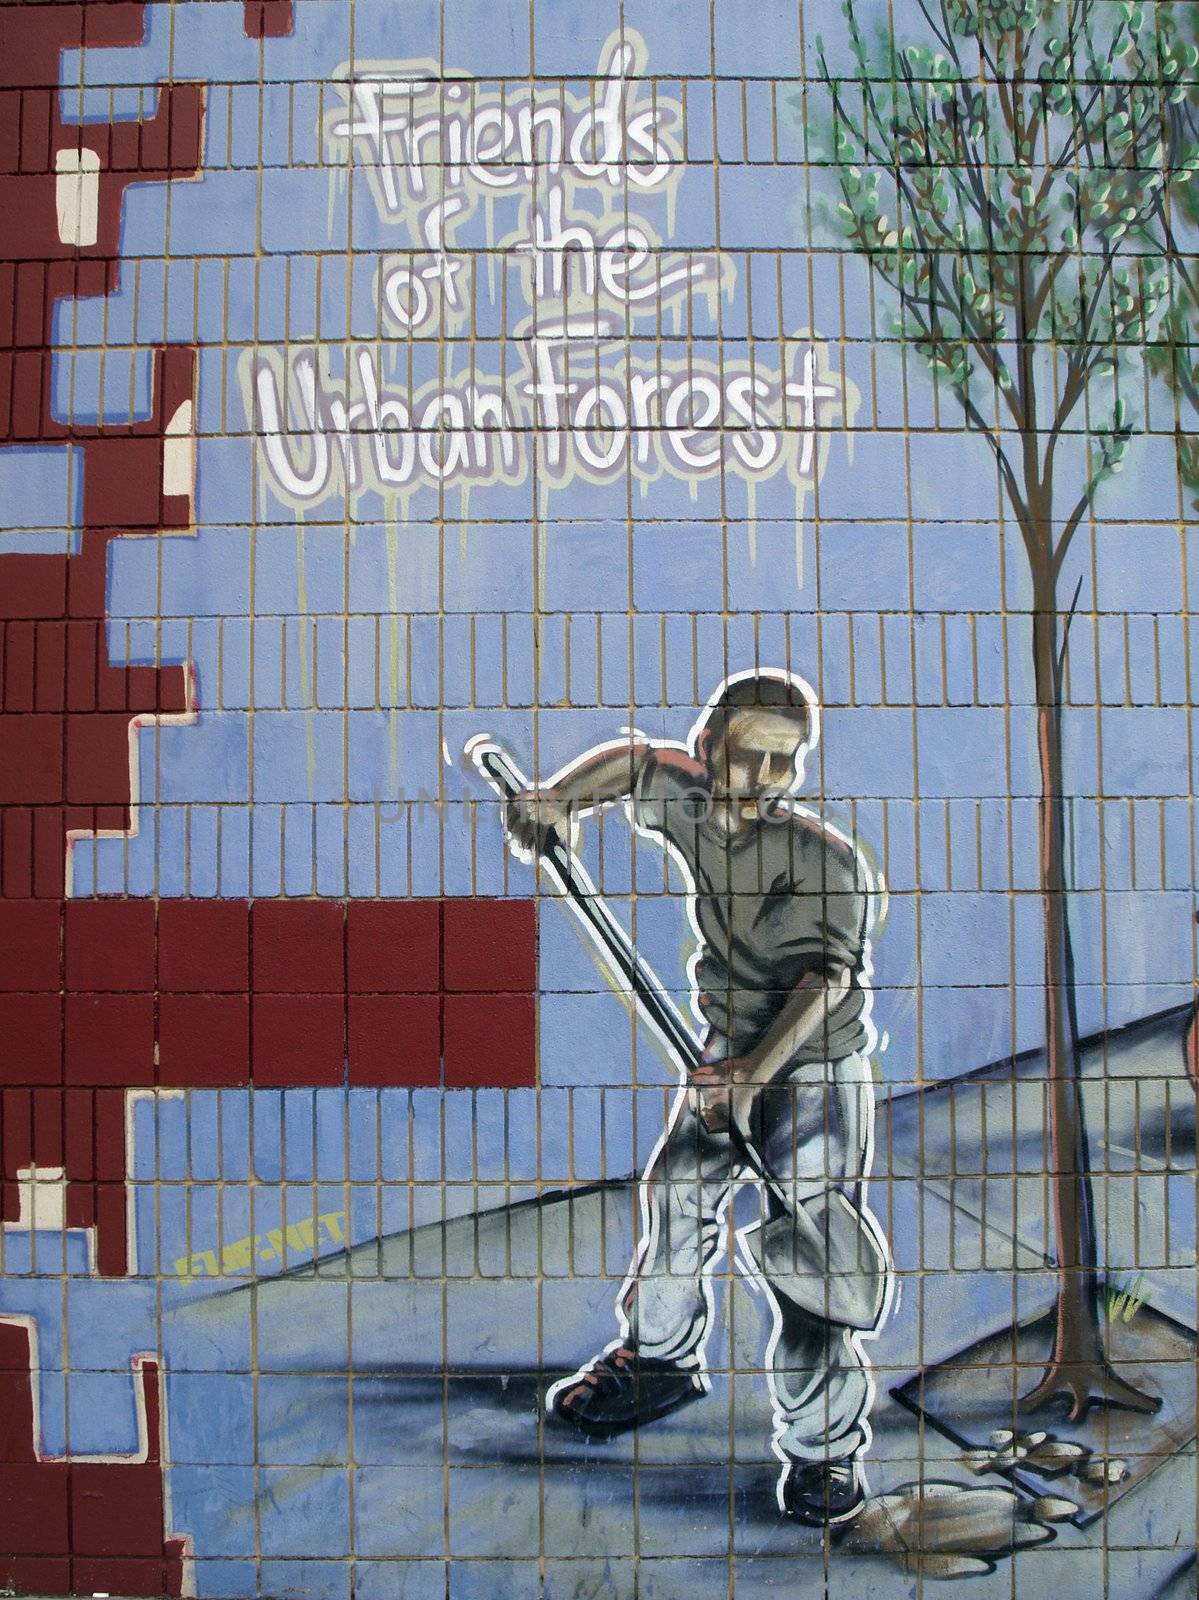 "Friends of the urban forrest" text on a graffiti